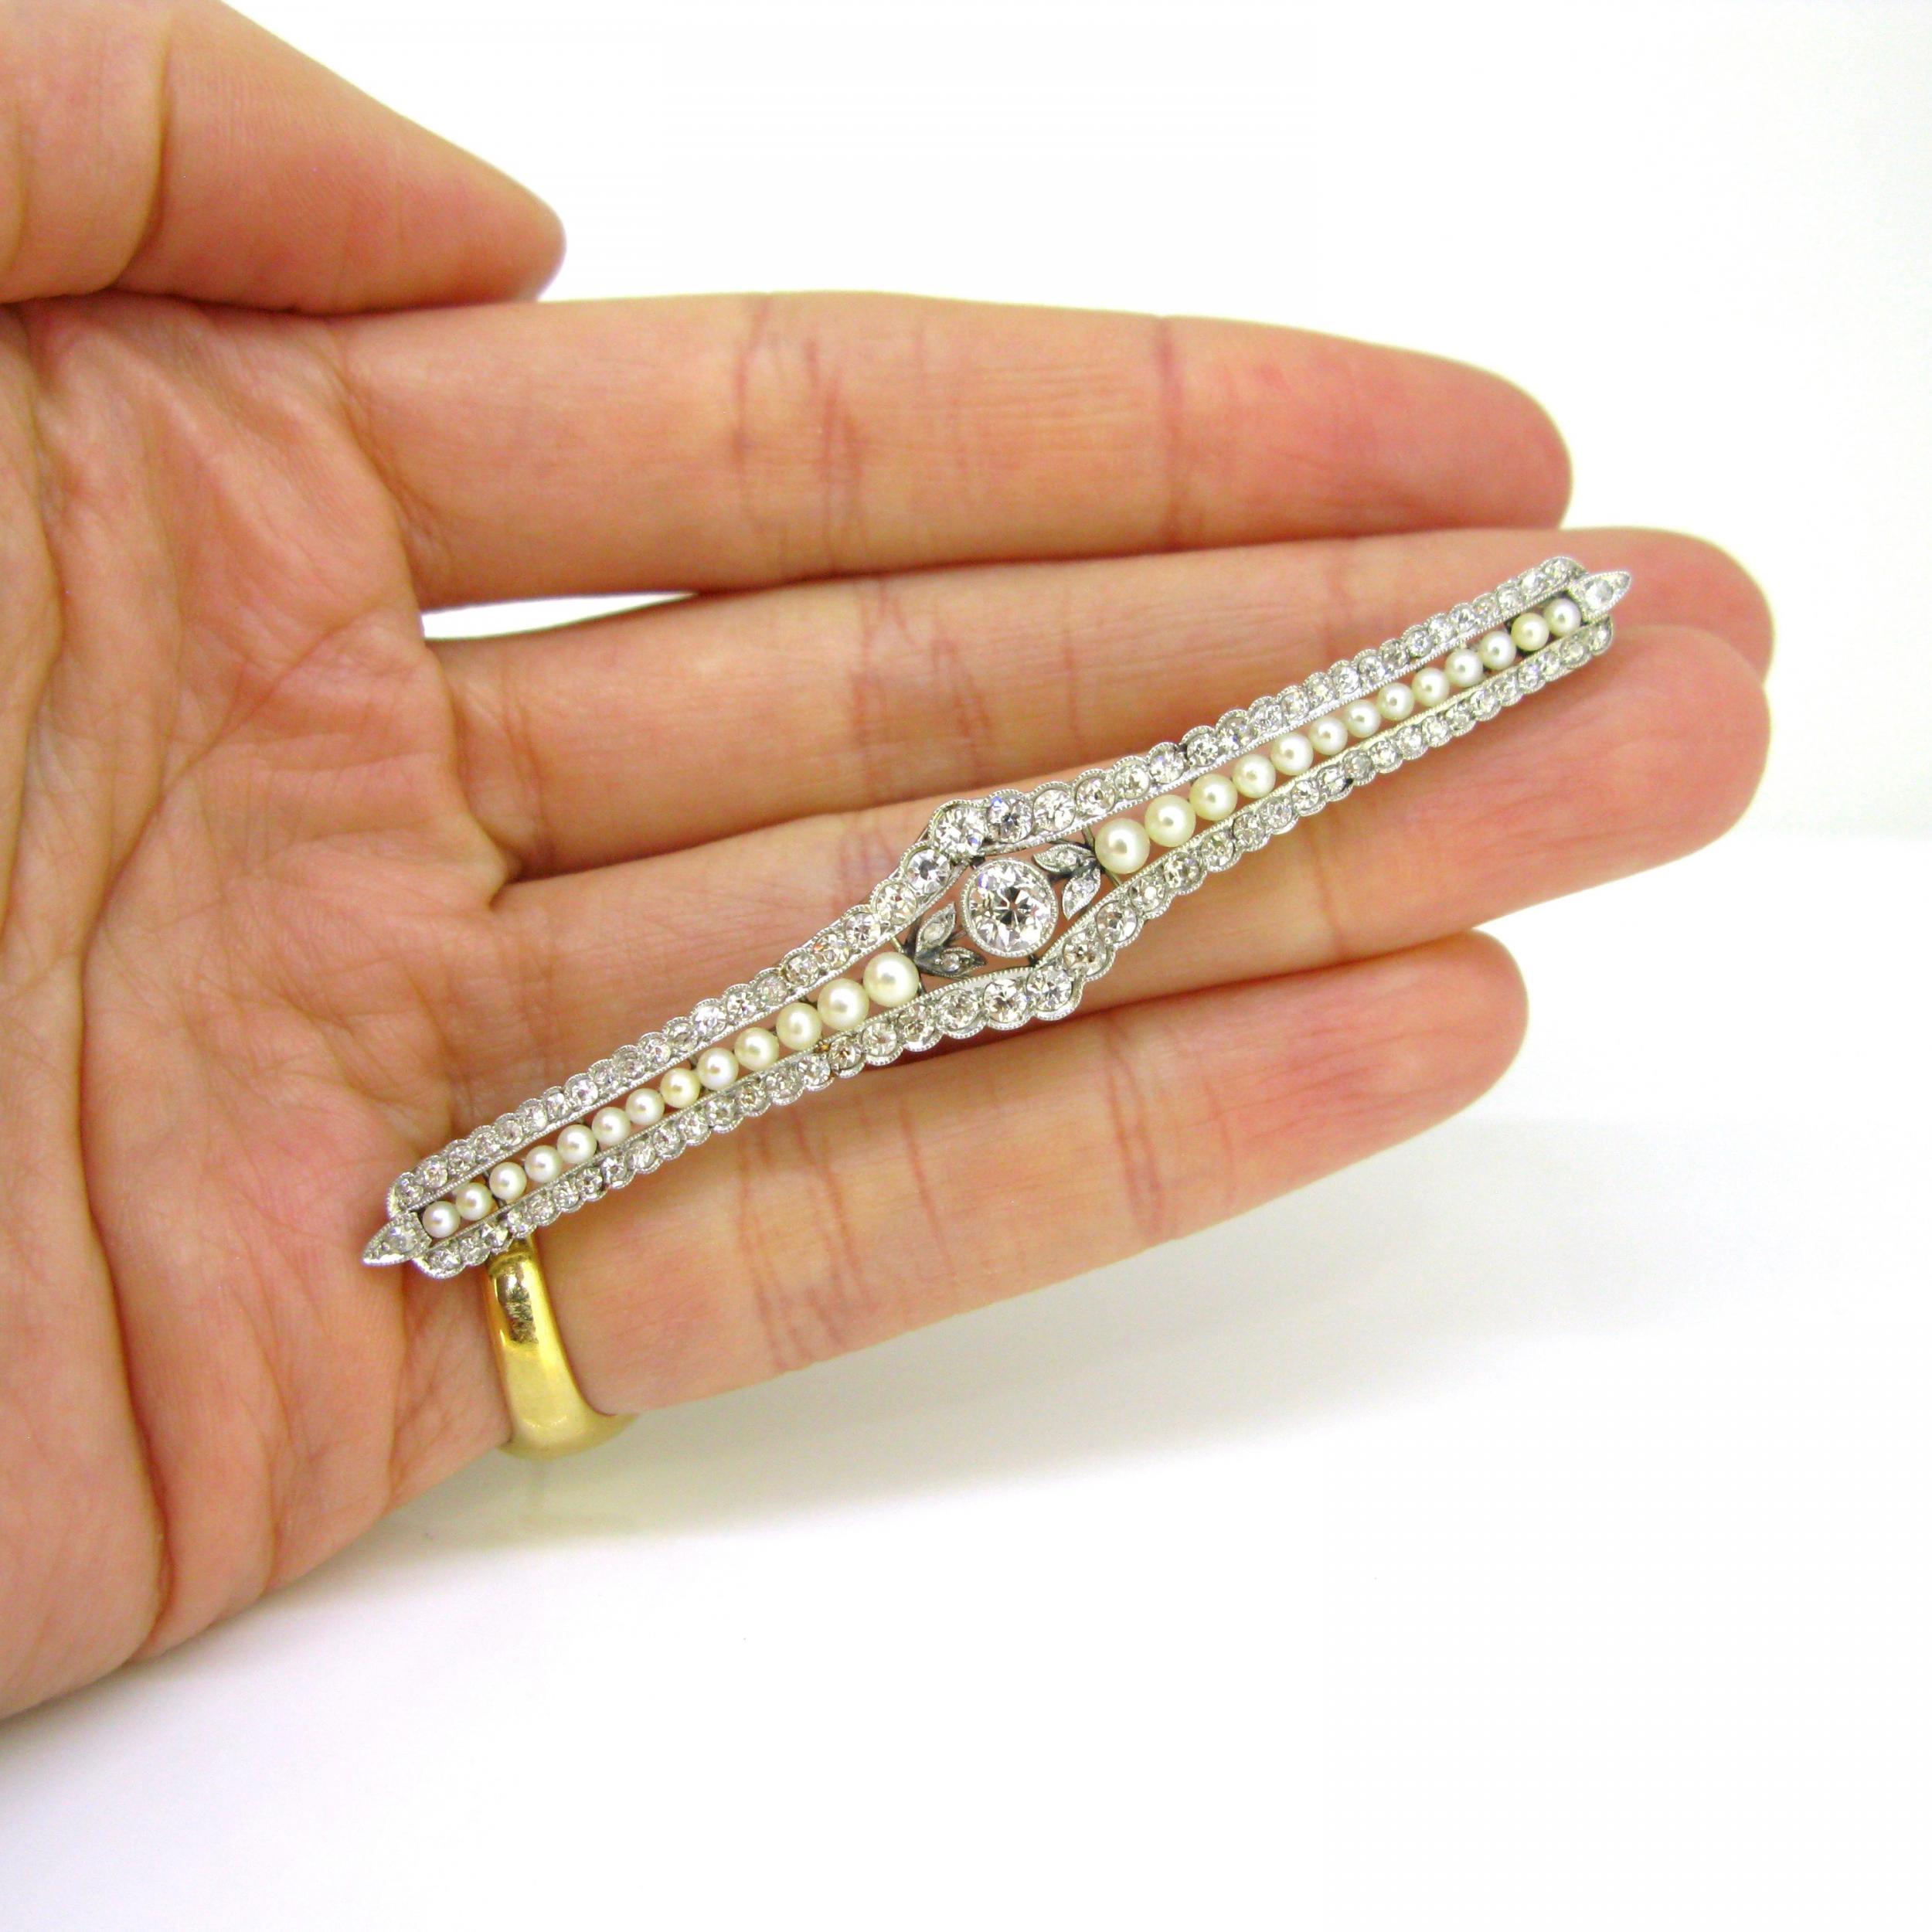 Antique Edwardian Diamonds and Pearls Brooch, 18kt Gold and Platinum, circa 1910 1